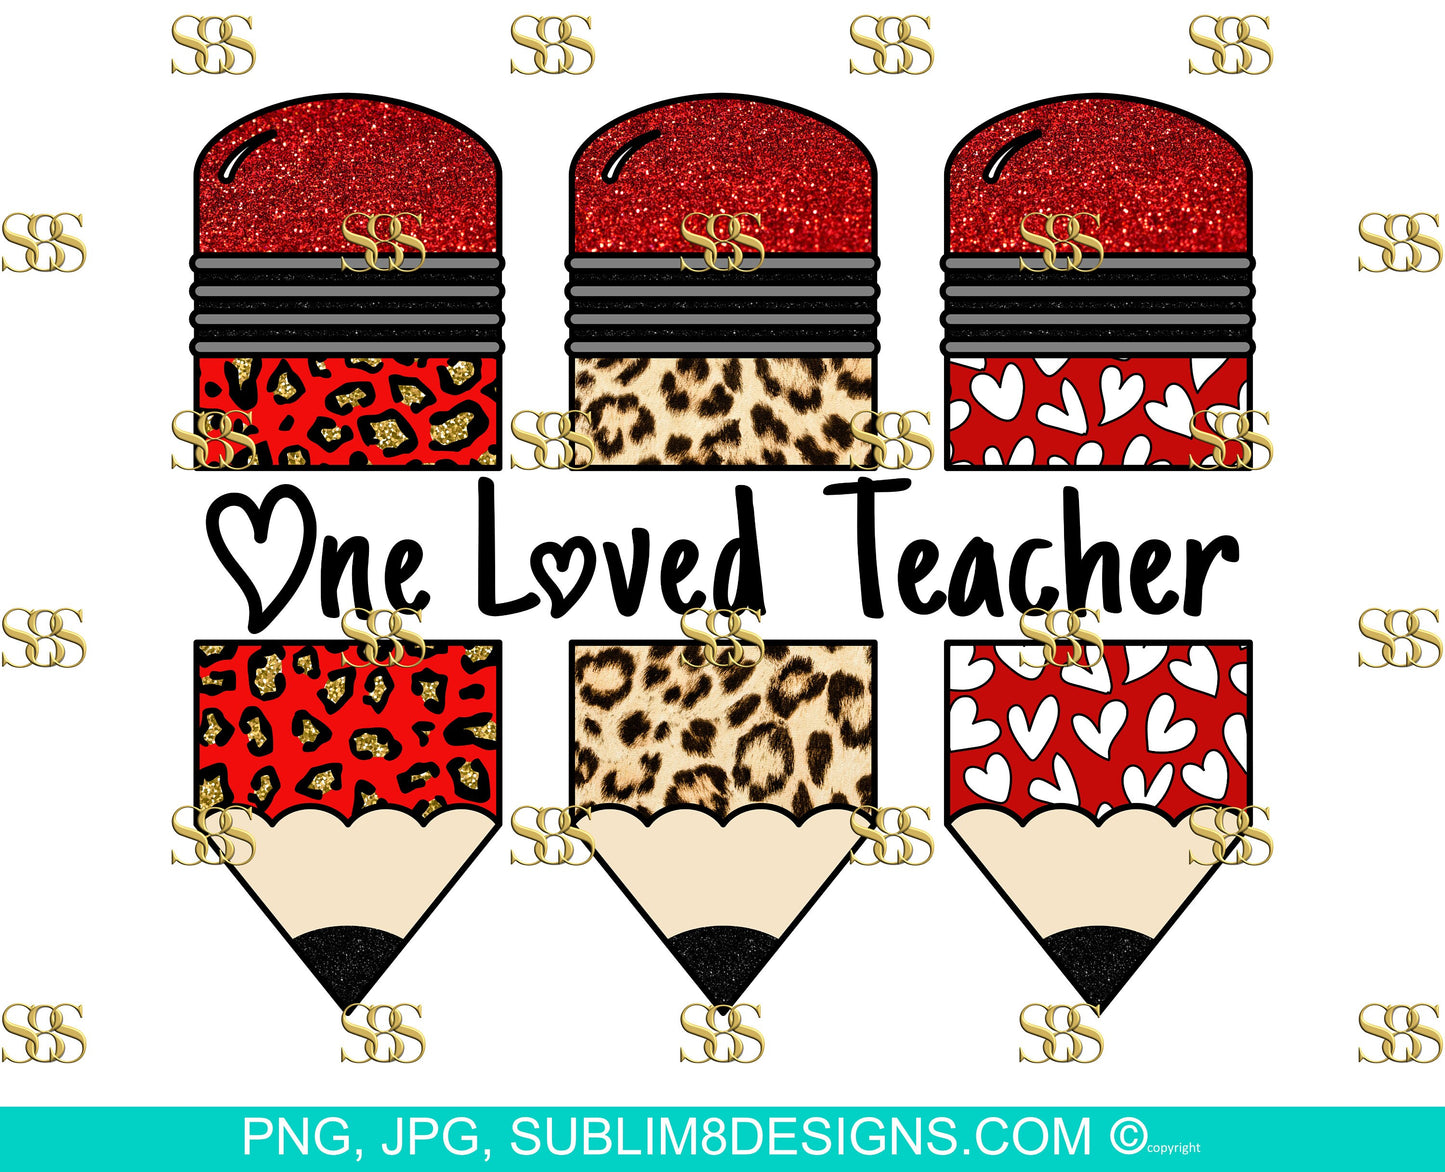 One Loved Teacher | Gifts for School | Teacher Design | Education Week | Teacher Gifts | Sublimation Design PNG and JPG ONLY